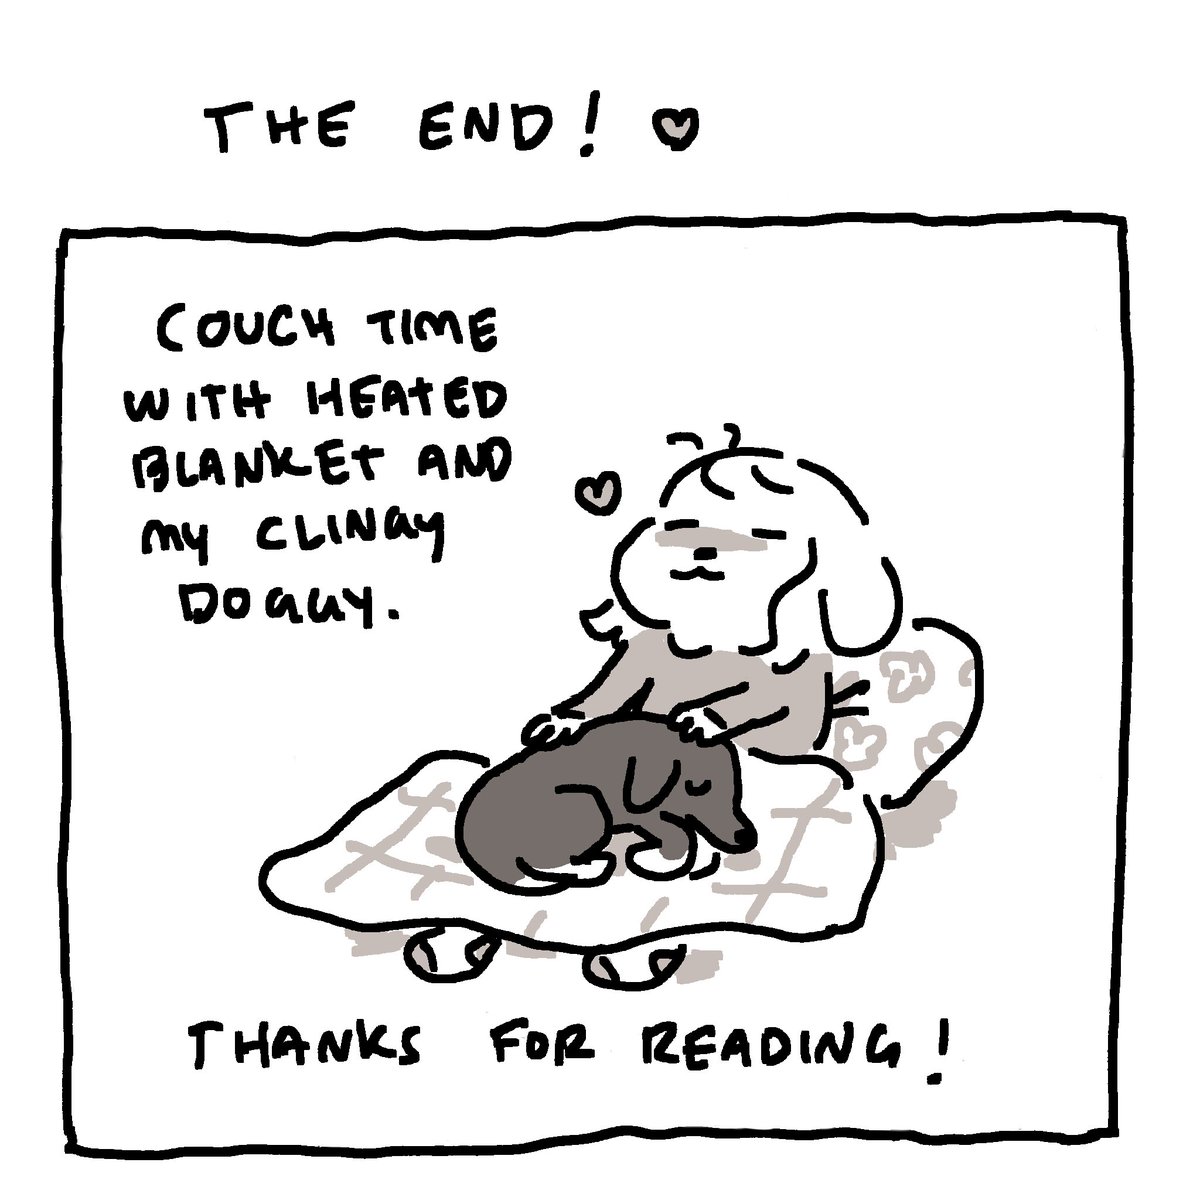 THE END!! happy hourlies day! hope you enjoyed seeing my silly little dog 